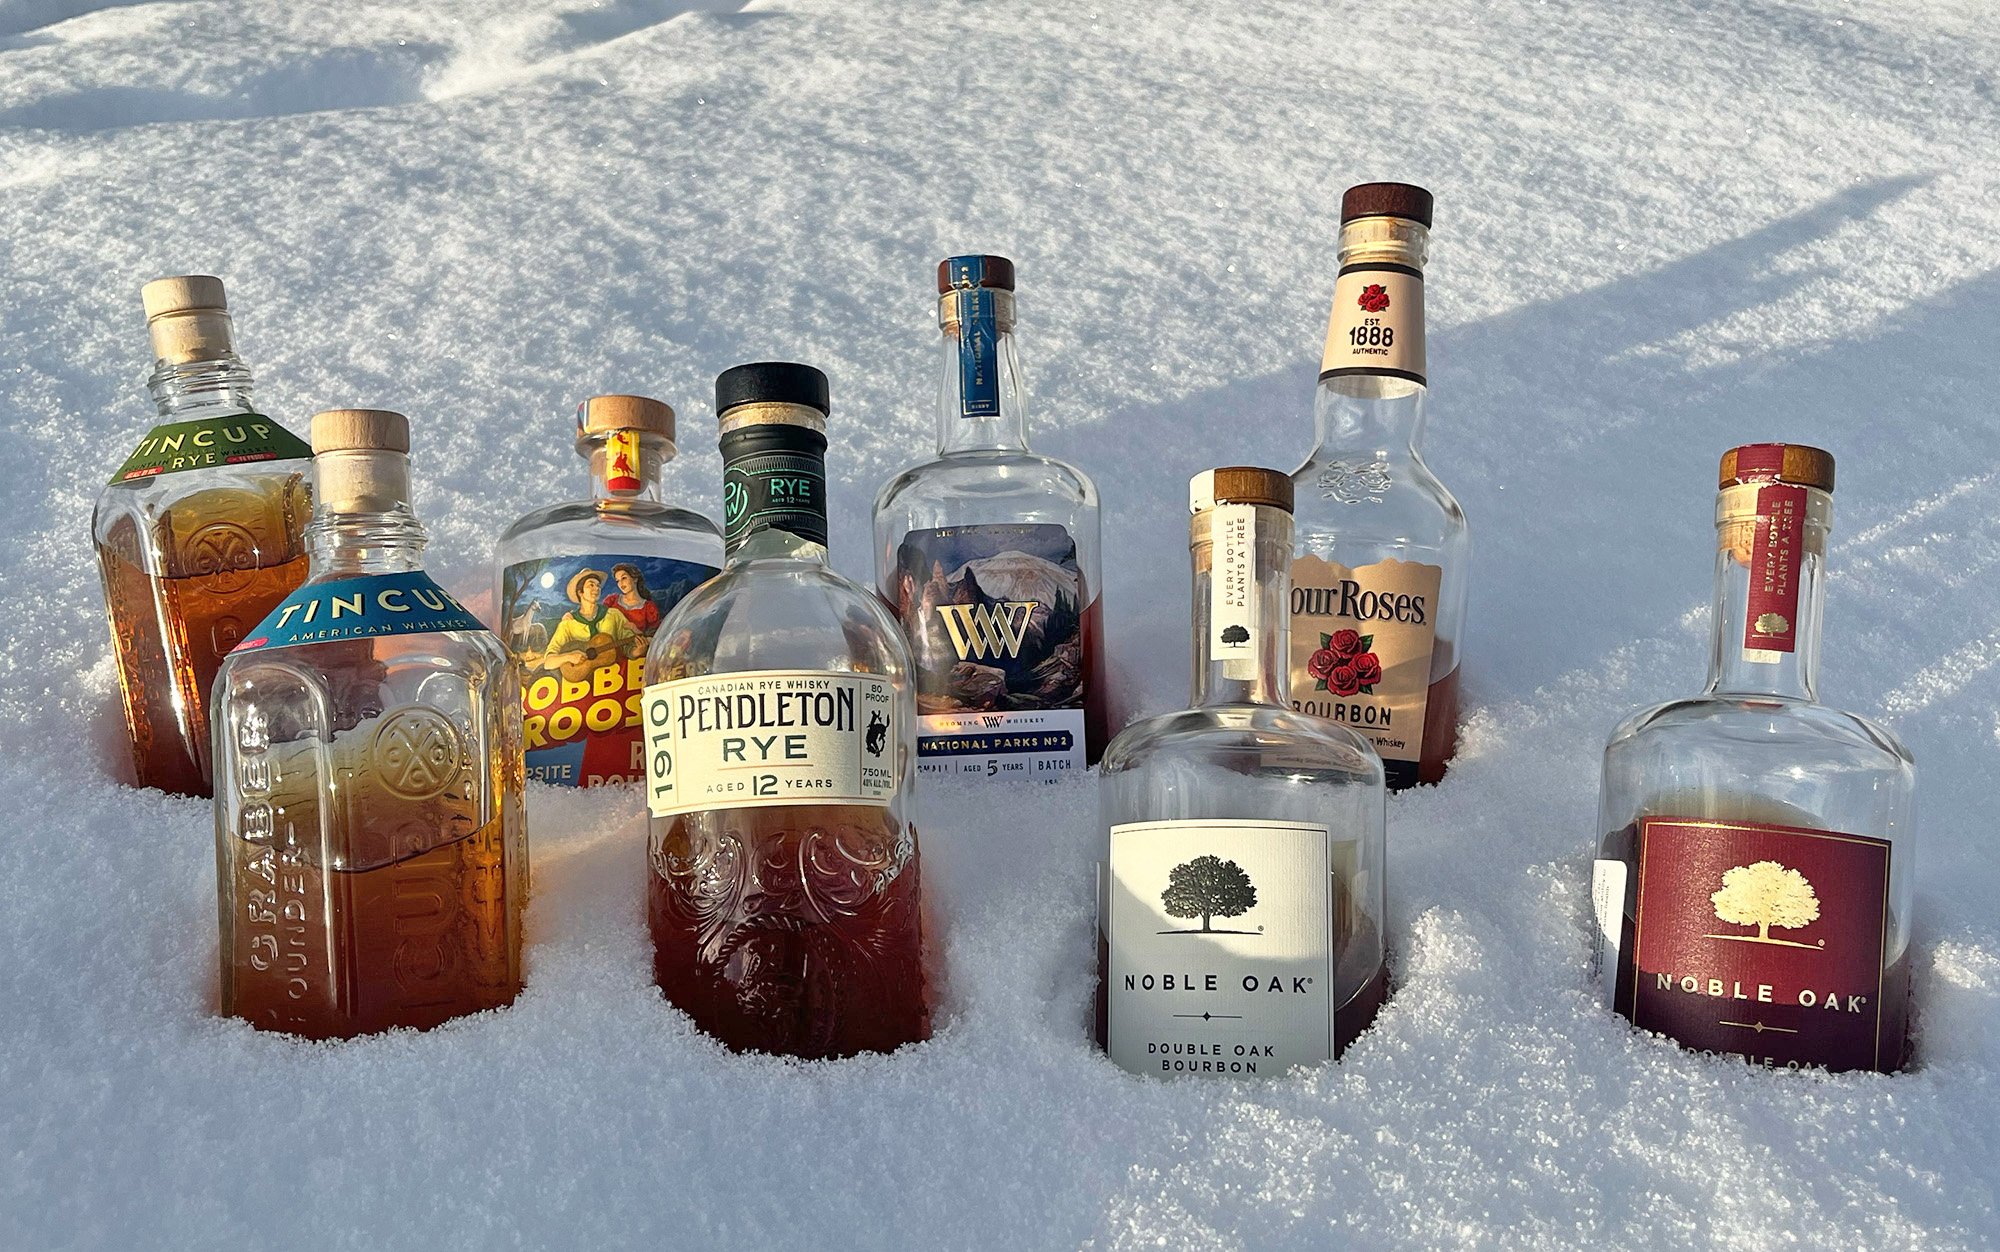 The best whiskeys for the backcountry sit in the snow.